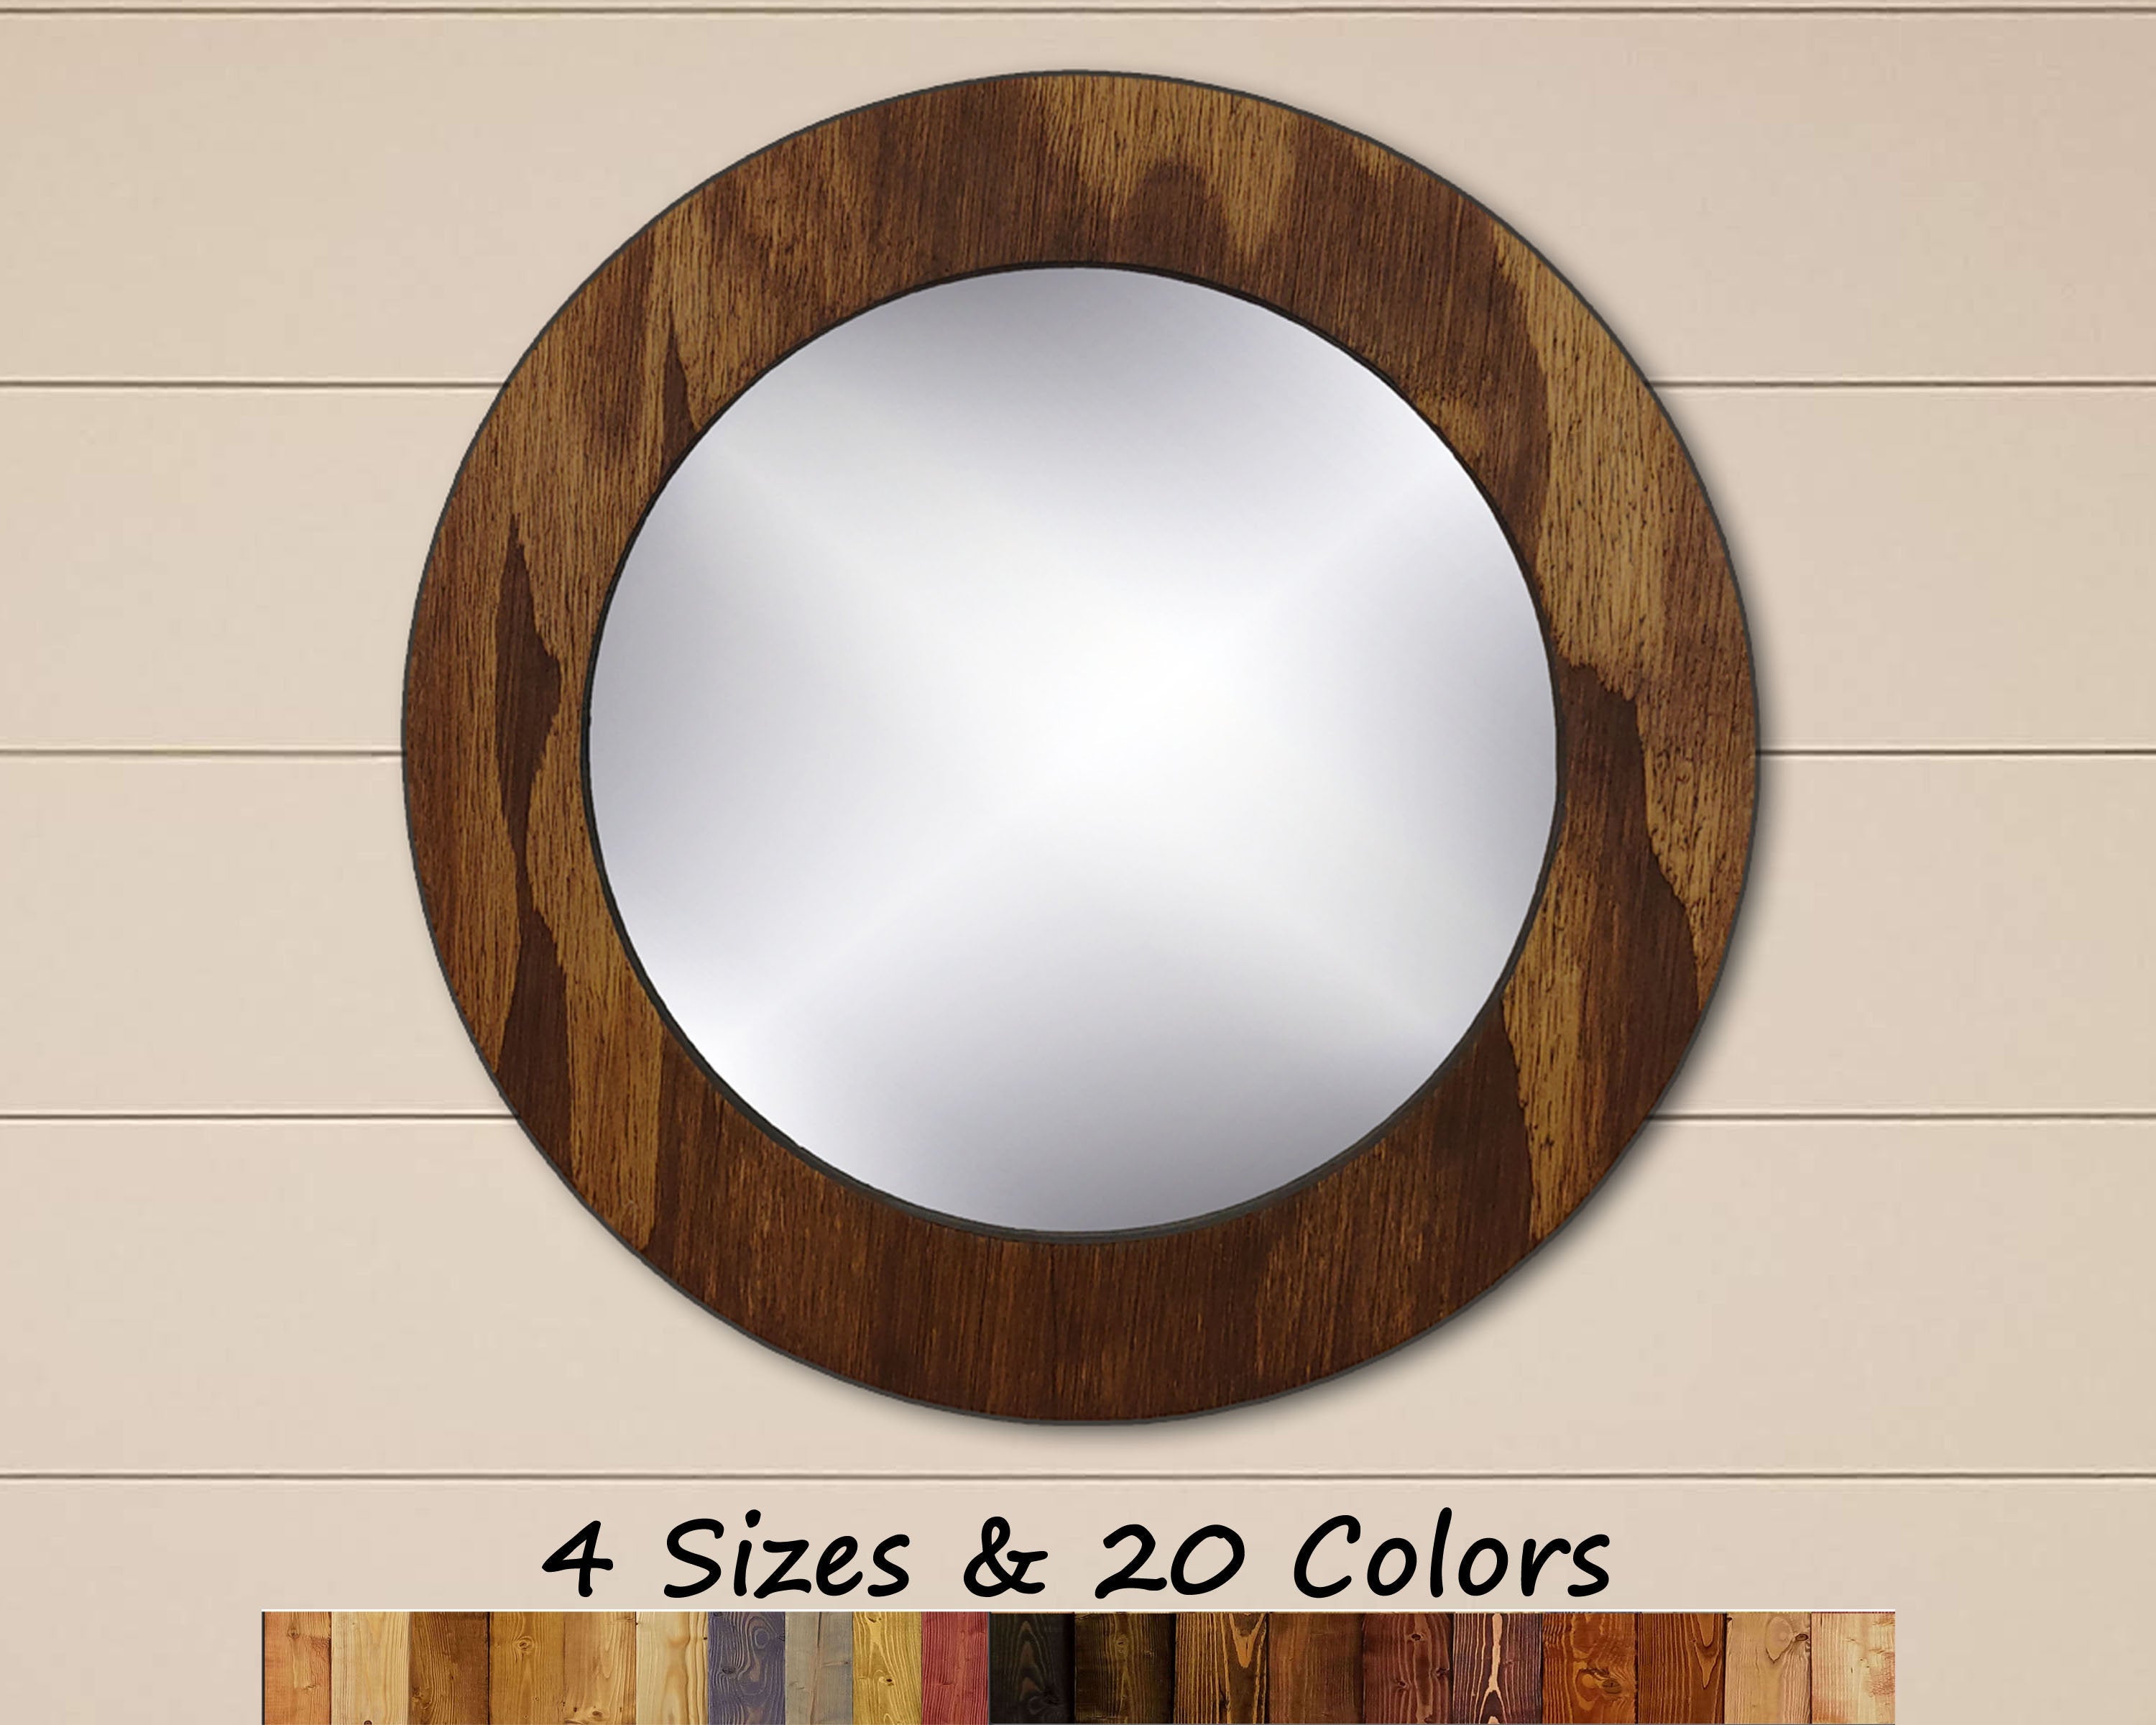 Wood Basics Round Decorative Wall Mirror, 20 Stain Color